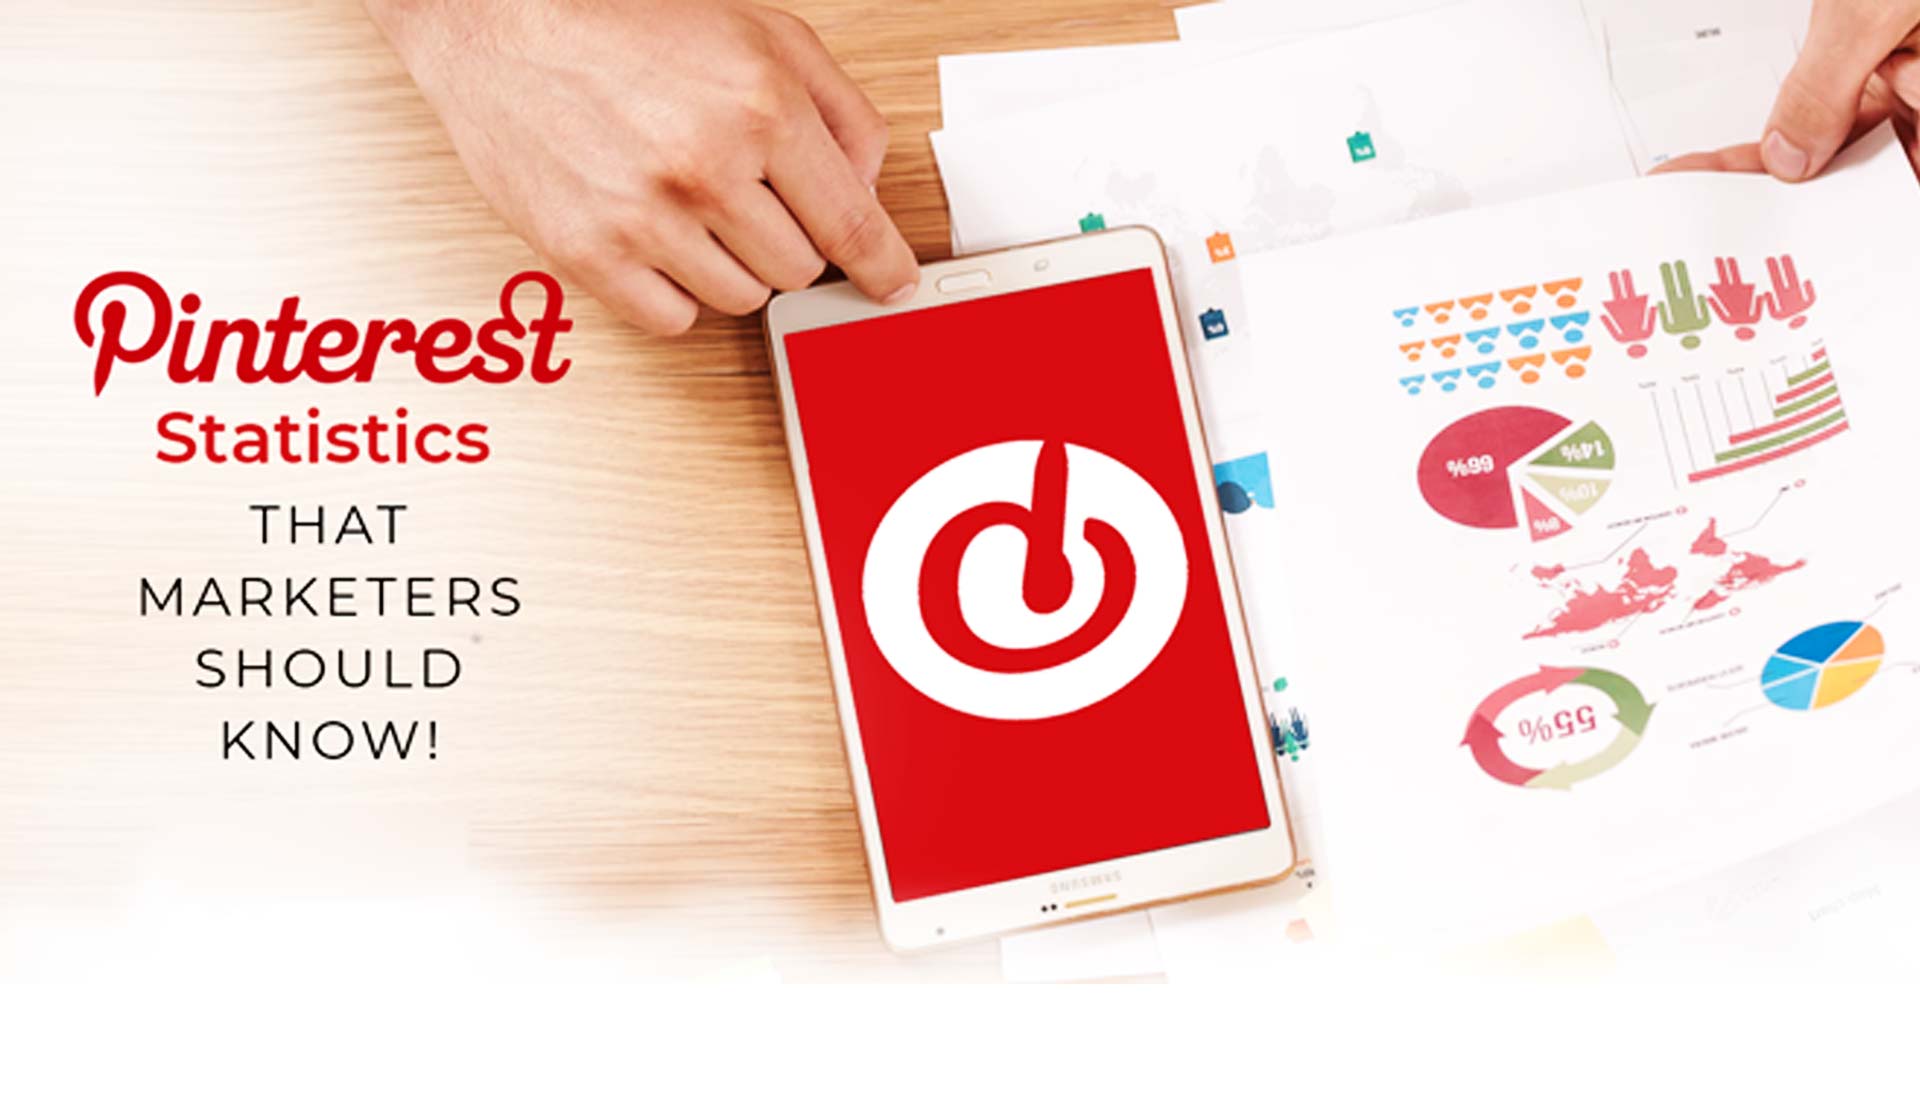 Pinterest statistics marketers must know in 2019